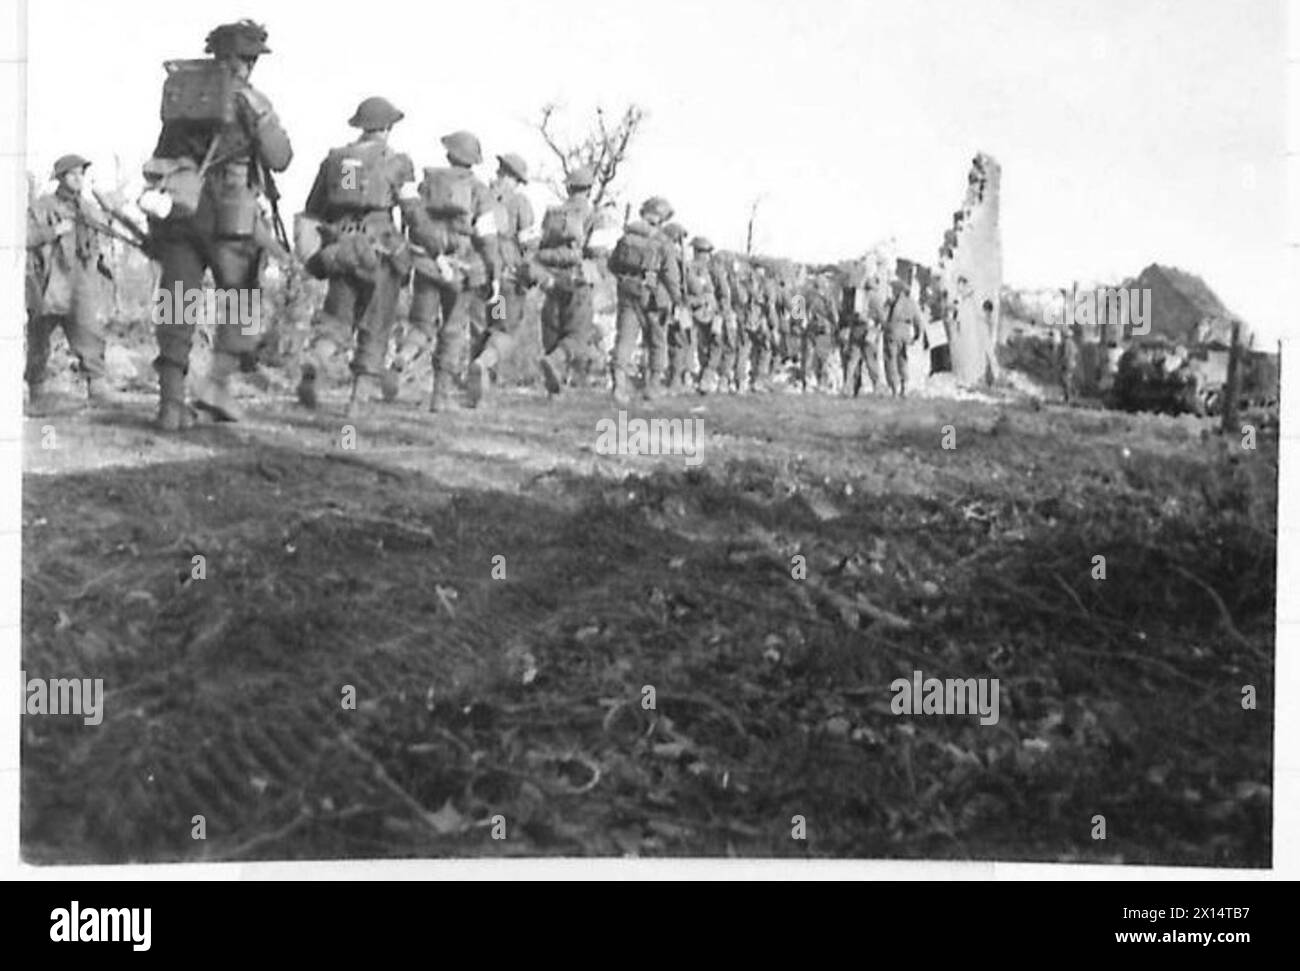 FALLS OF GEILENKIRCHEN - Infantry of the SLI Regt march into Bauchem to relieve the dorset Regt British Army, 21st Army Group Stock Photo